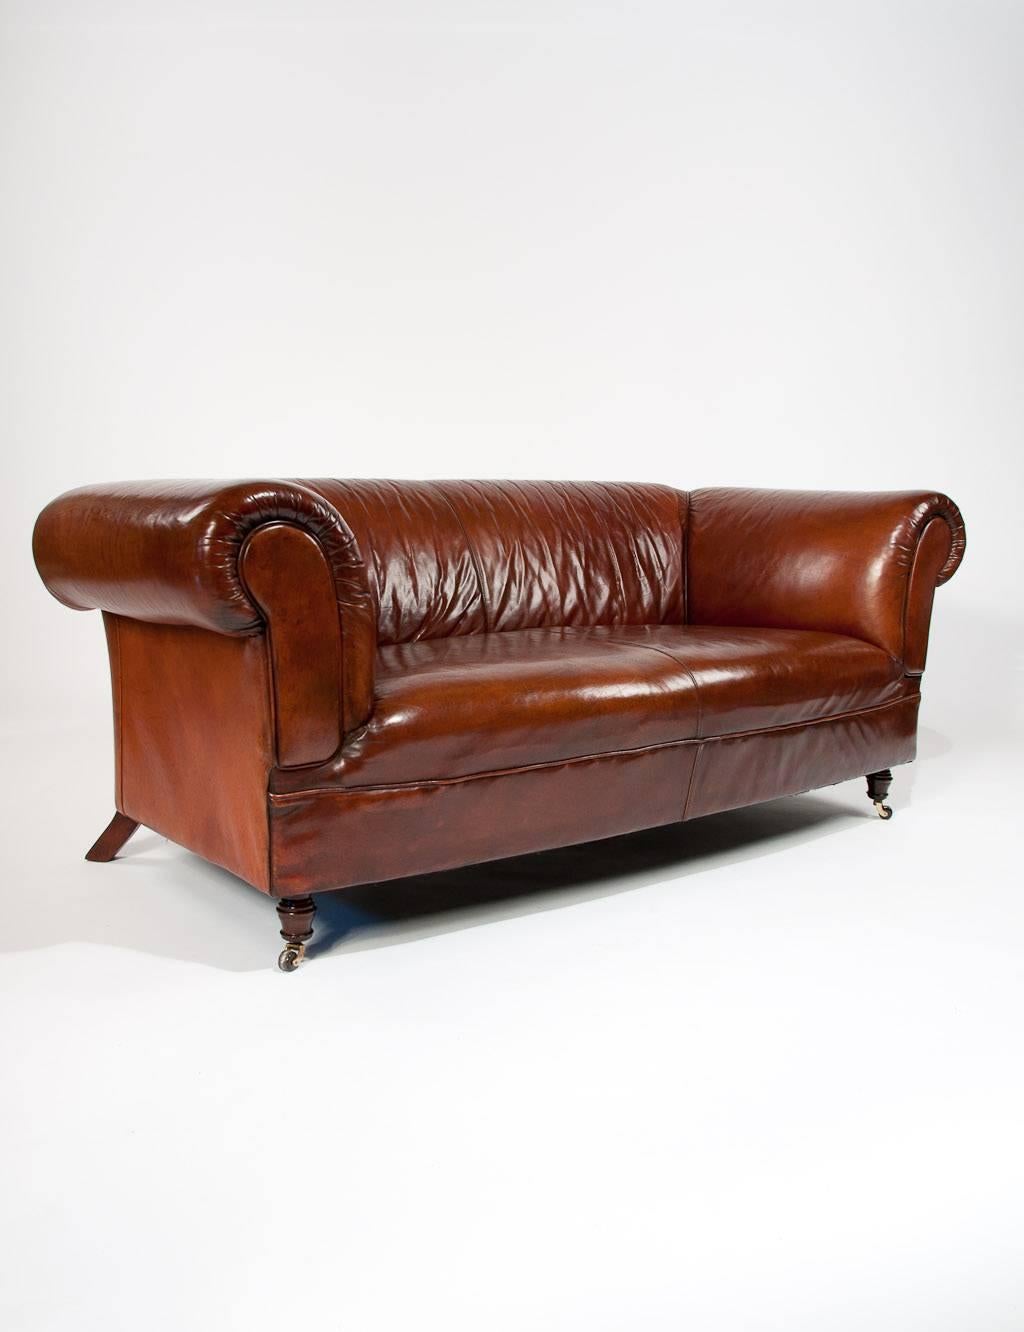 A very comfortable and well proportioned Mid 20Th Century tan / brown leather upholstered chesterfield. This very good quality leather chesterfield has extremely good proportions and in excellent condition retaining its original tan / brown leather.